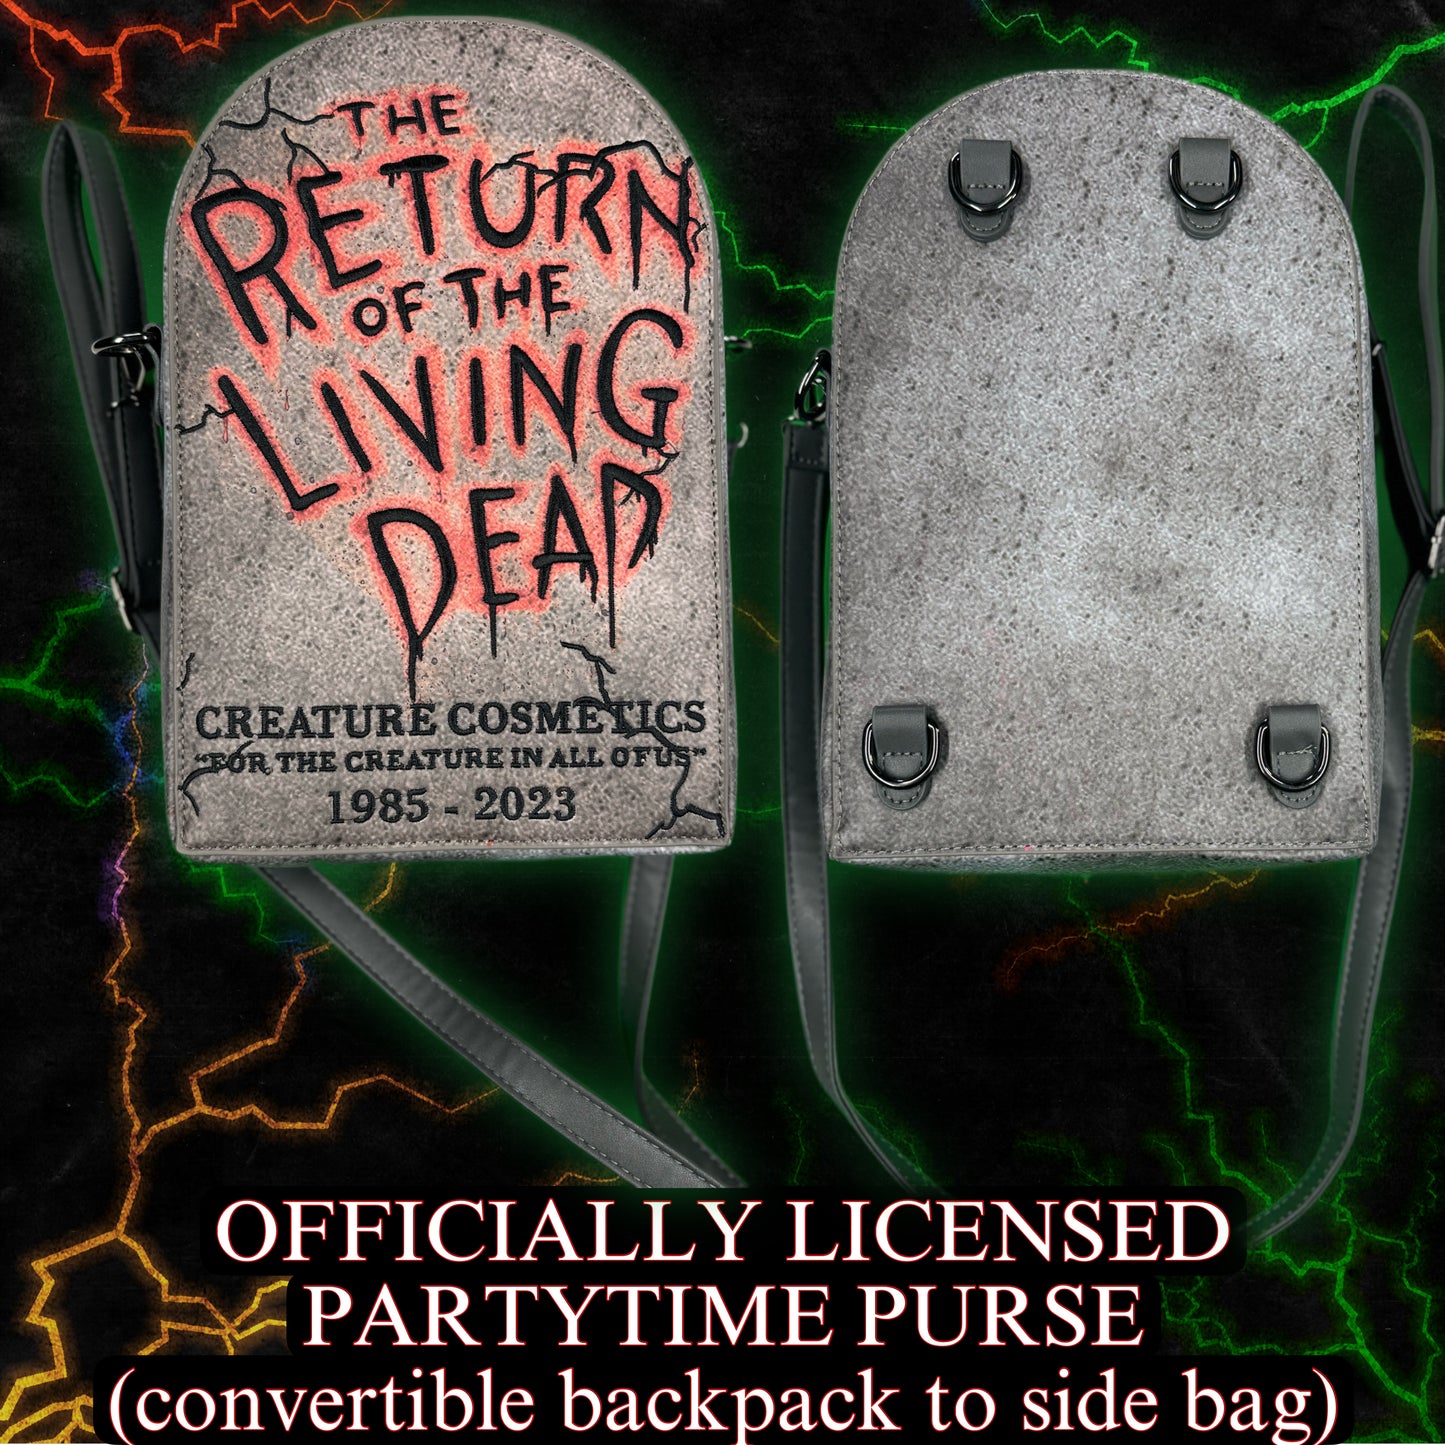 PARTYTIME PURSE